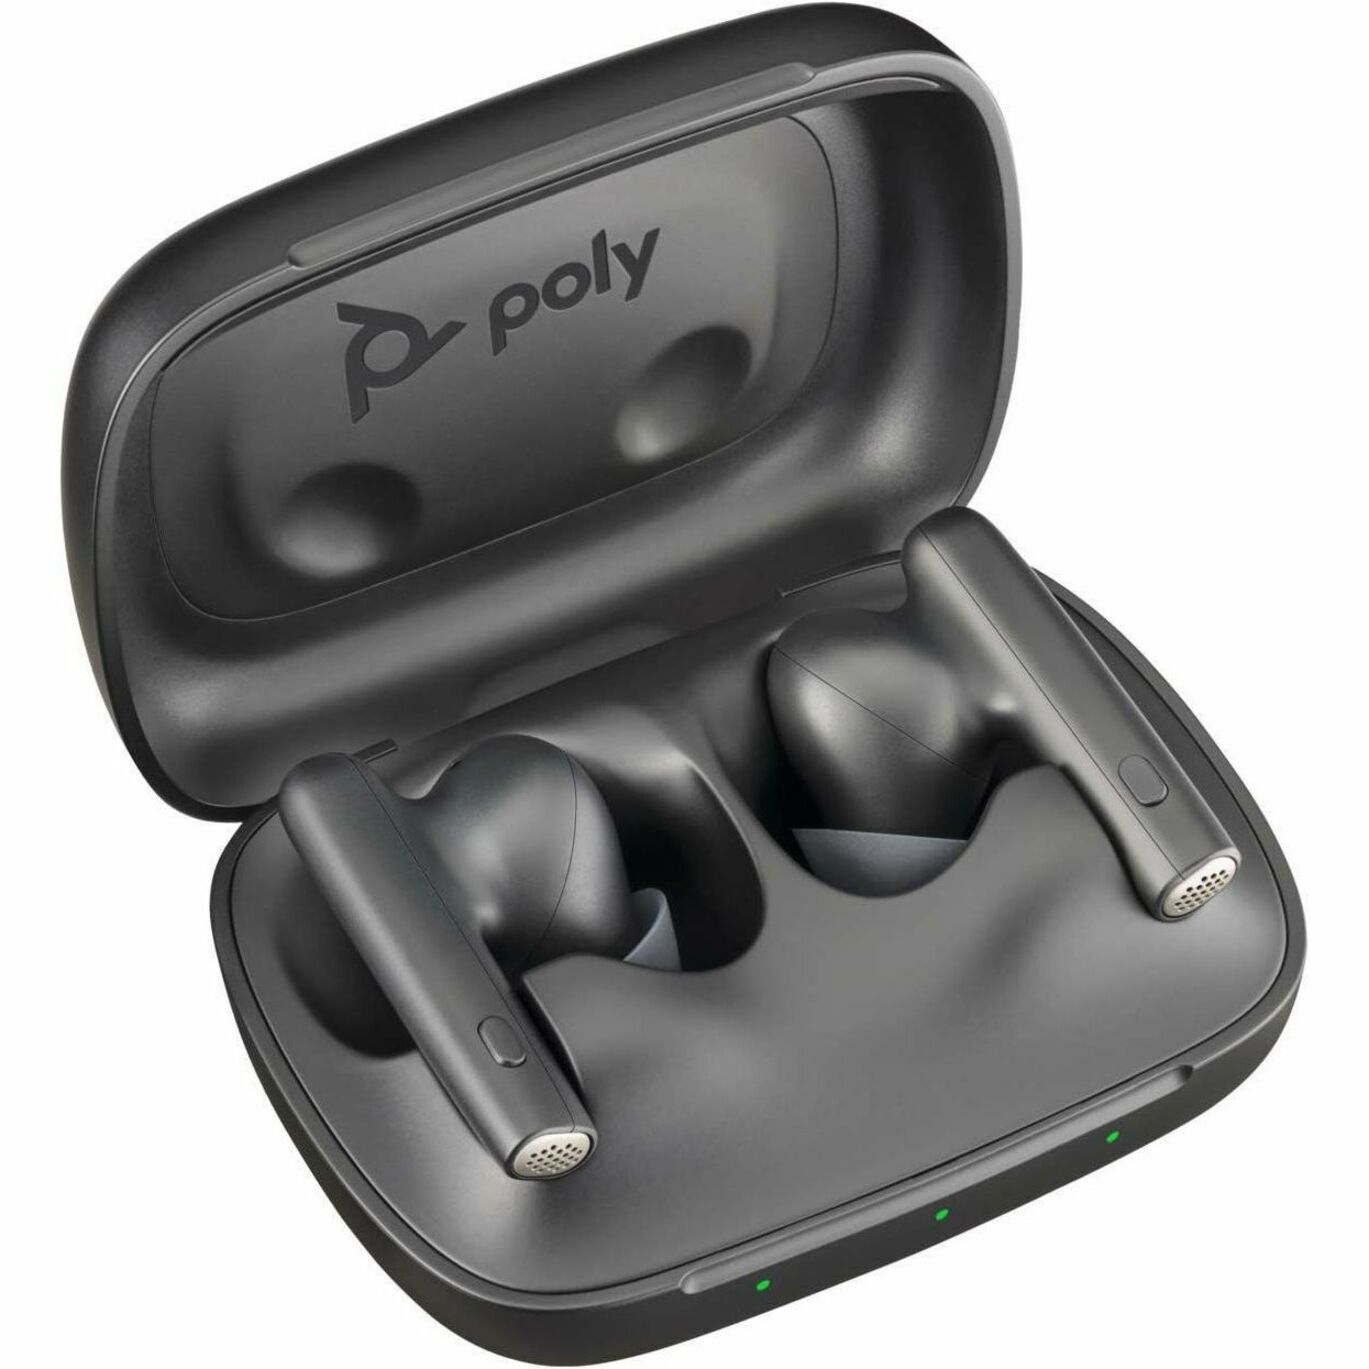 Poly 7Y8H4AA Voyager Free 60 UC Earset, Hybrid Active Noise Cancelling, Lightweight, Stereo Sound, Carbon Black